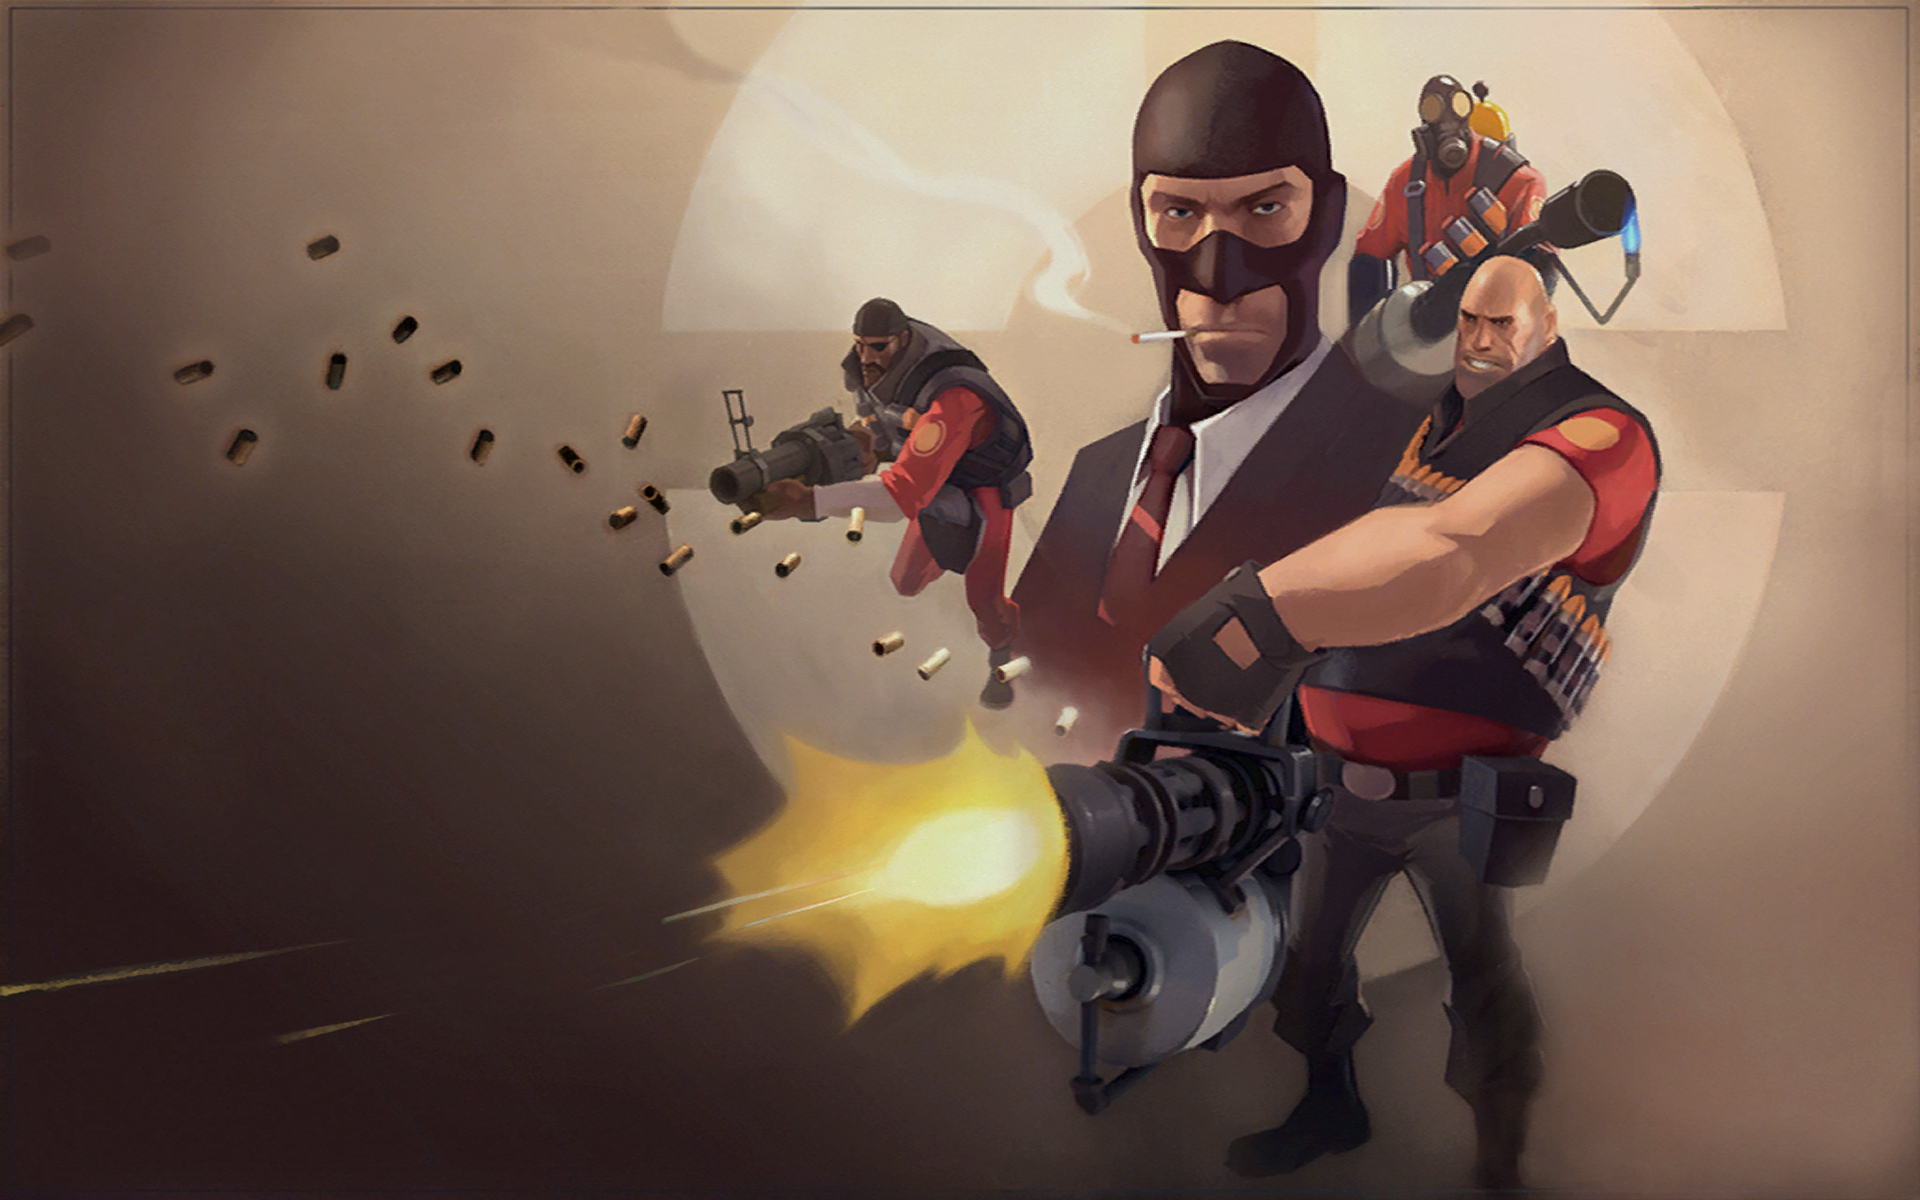 Tf2 Soldier Wallpapers